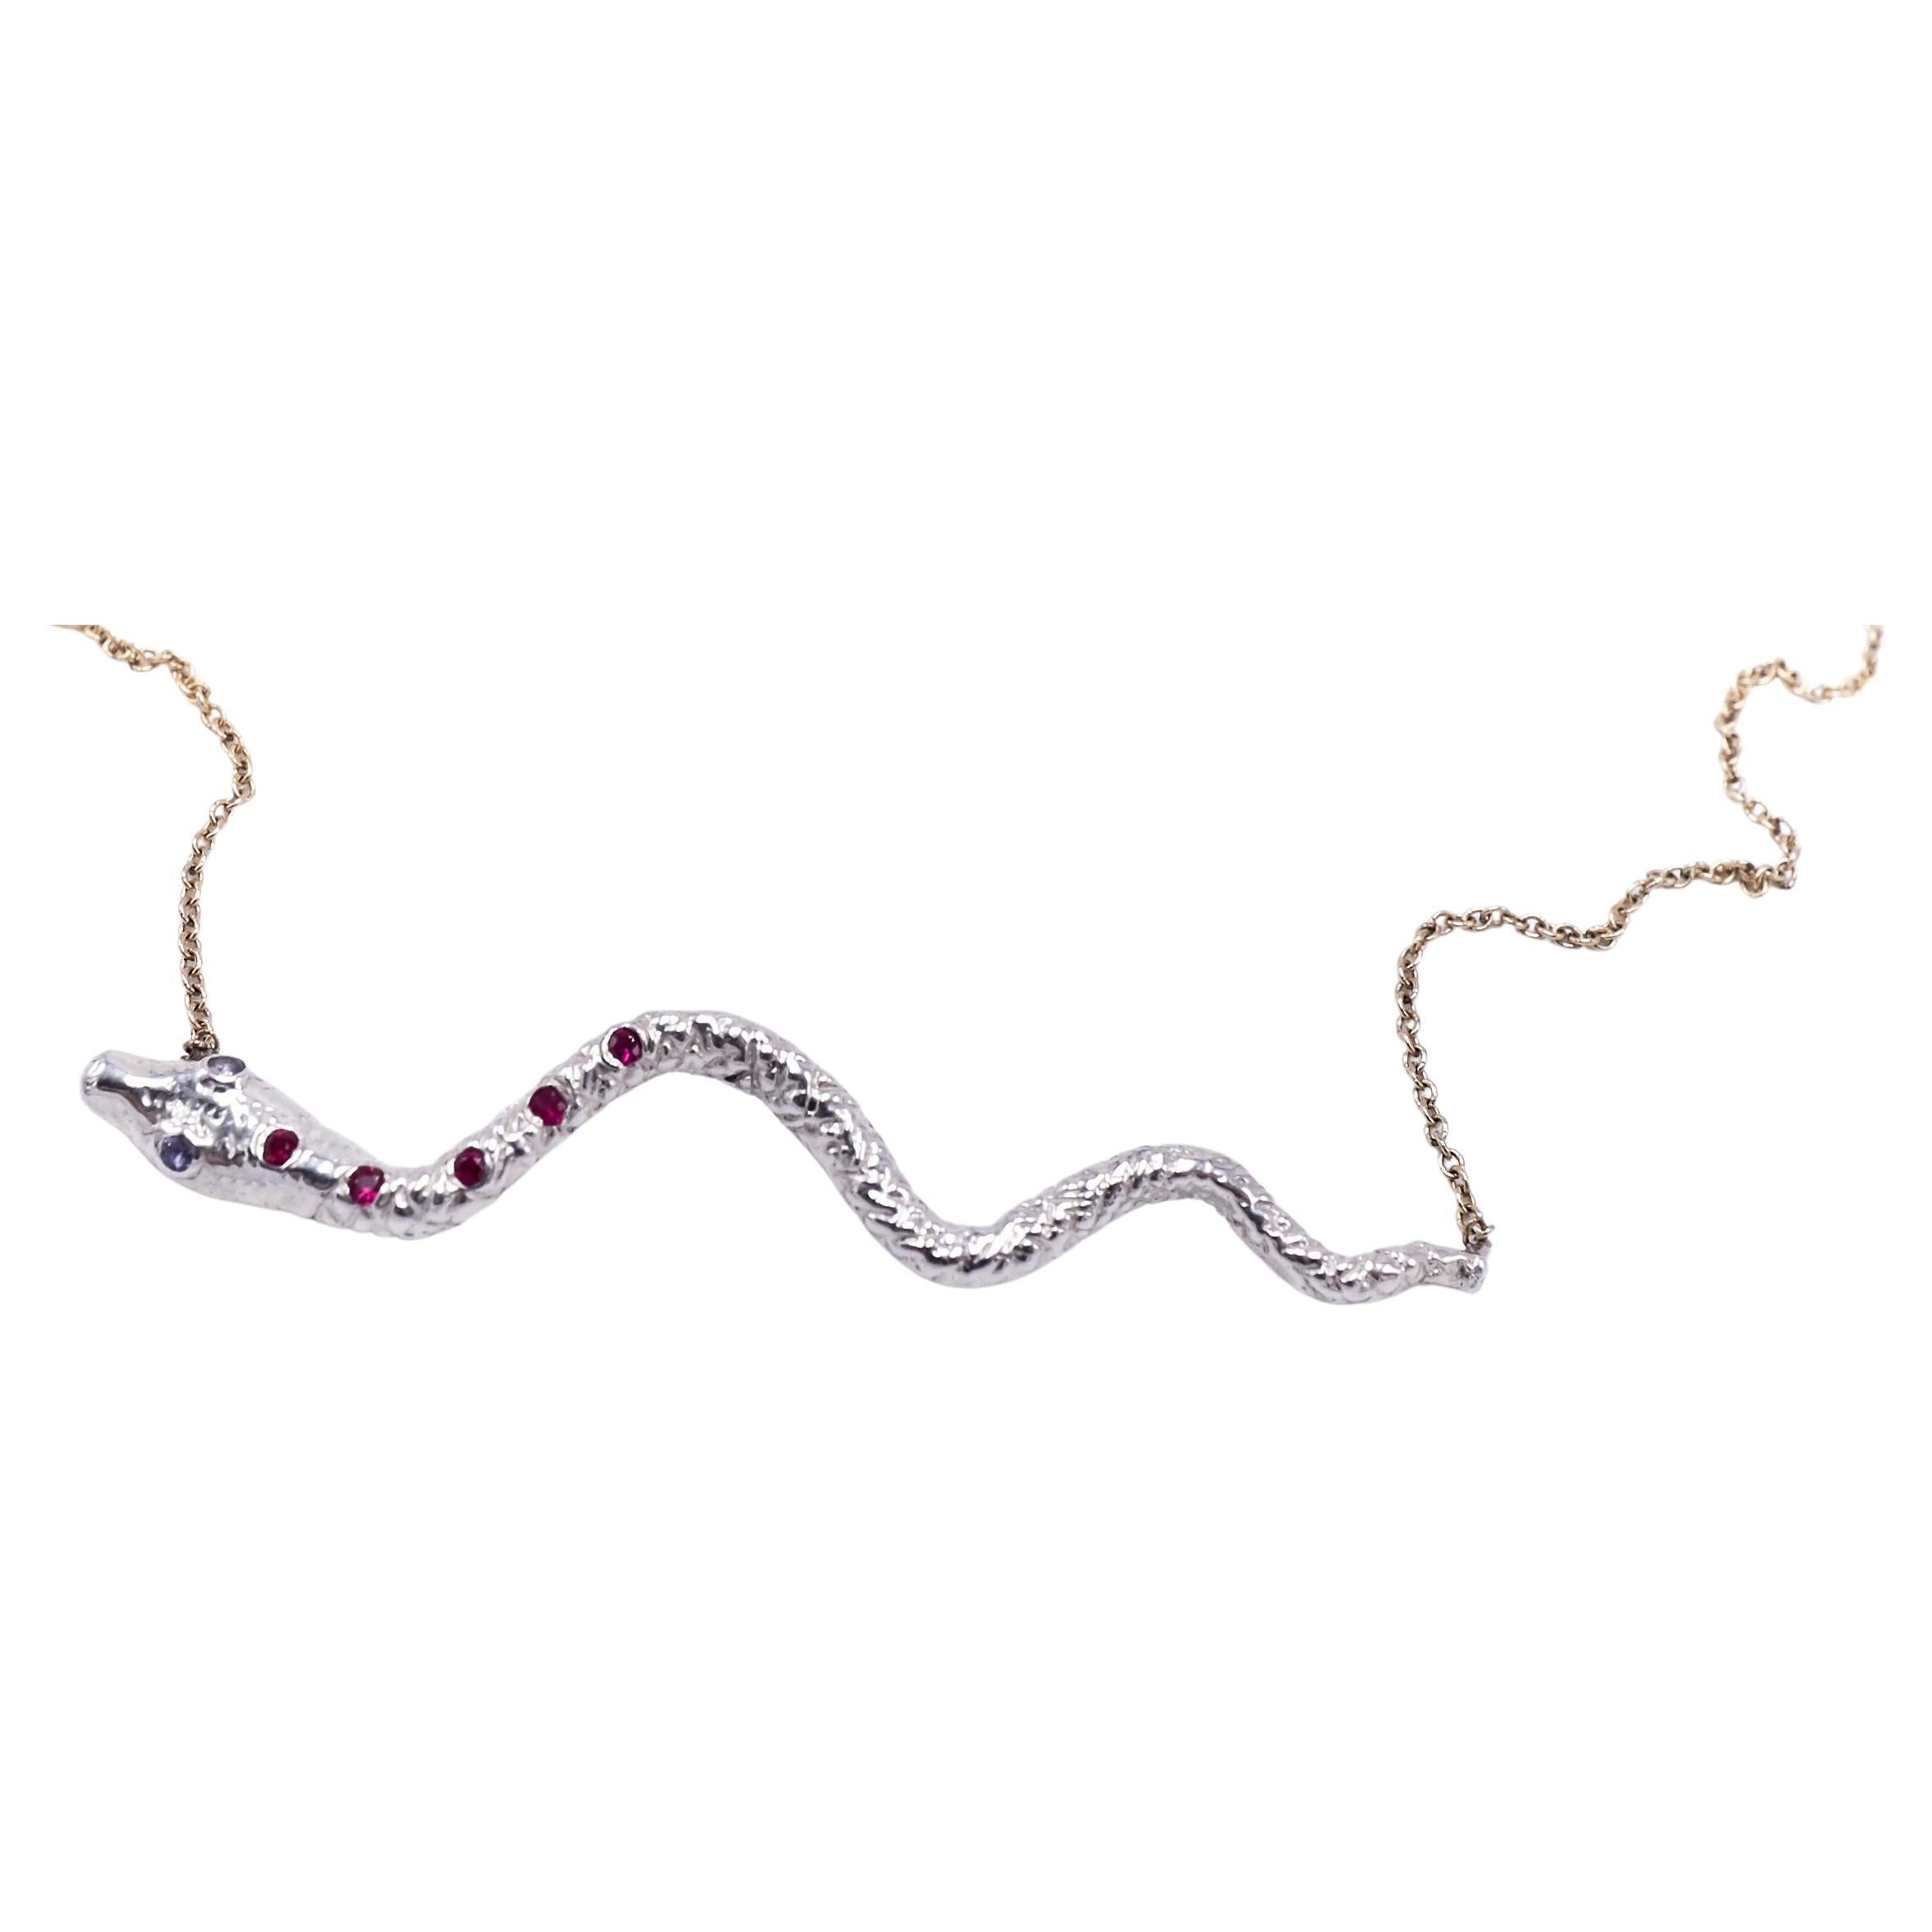 5 Ruby 2 Iolite Snake White Gold Pendant  Yellow Gold Chain Choker Necklace J Dauphin

J DAUPHIN short necklace 